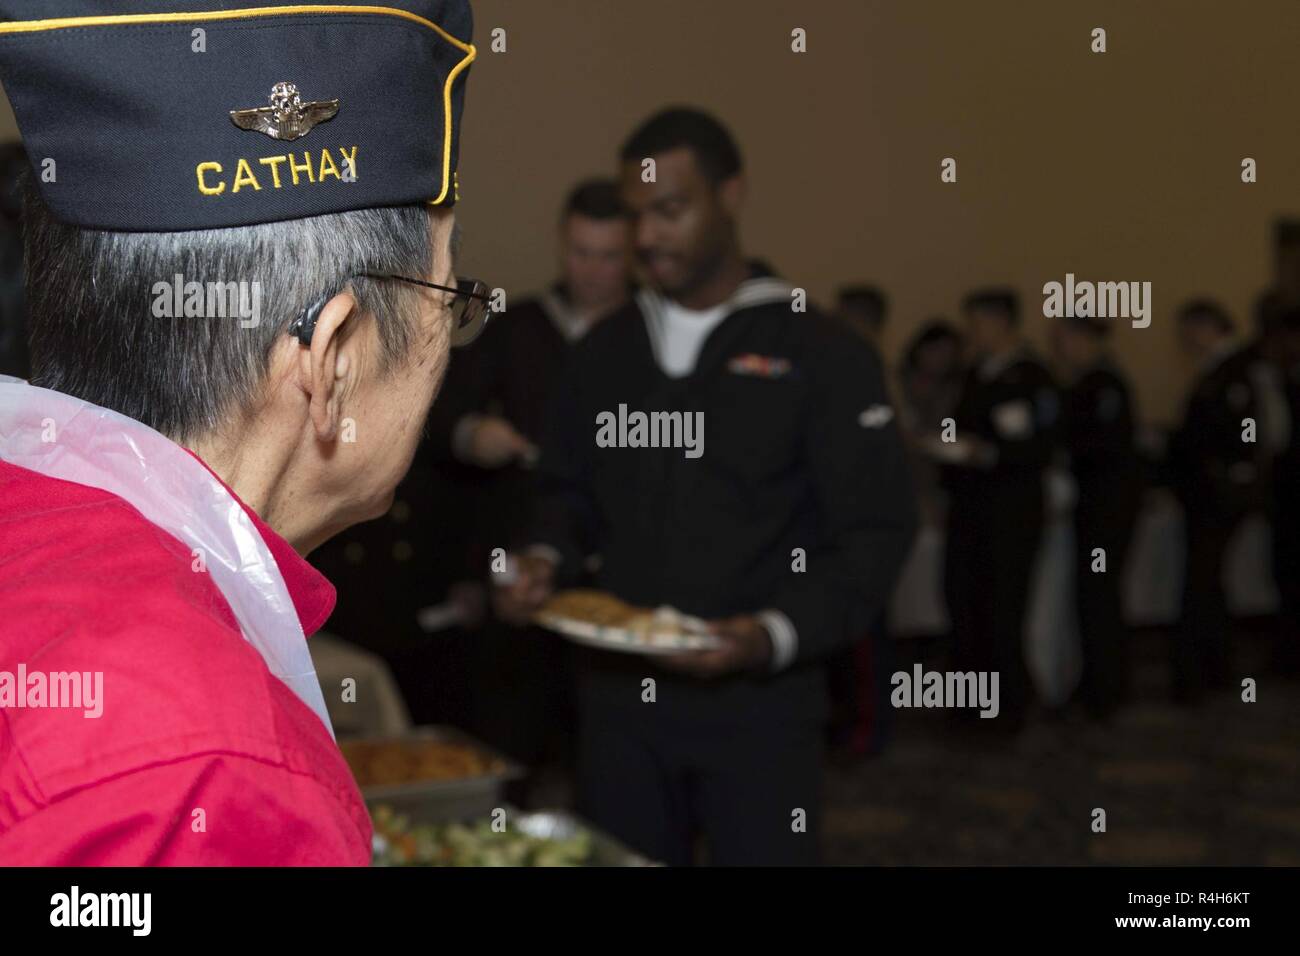 SAN FRANCISCO (Oct. 2, 2018) Members of the American Legion-Cathay Post 384 serve food to Sailors and Marines during their 'Luncheon for the Troops' event held at the San Francisco War Memorial Veterans building during San Francisco Fleet Week  (SFFW) 2018. SFFW is an opportunity for the American public to meet their Navy, Marine Corps and Coast Guard teams and experience America's sea services. During fleet week, service members participate in various community service events, showcase capabilities and equipment to the community, and enjoy the hospitality of San Francisco and its surrounding  Stock Photo